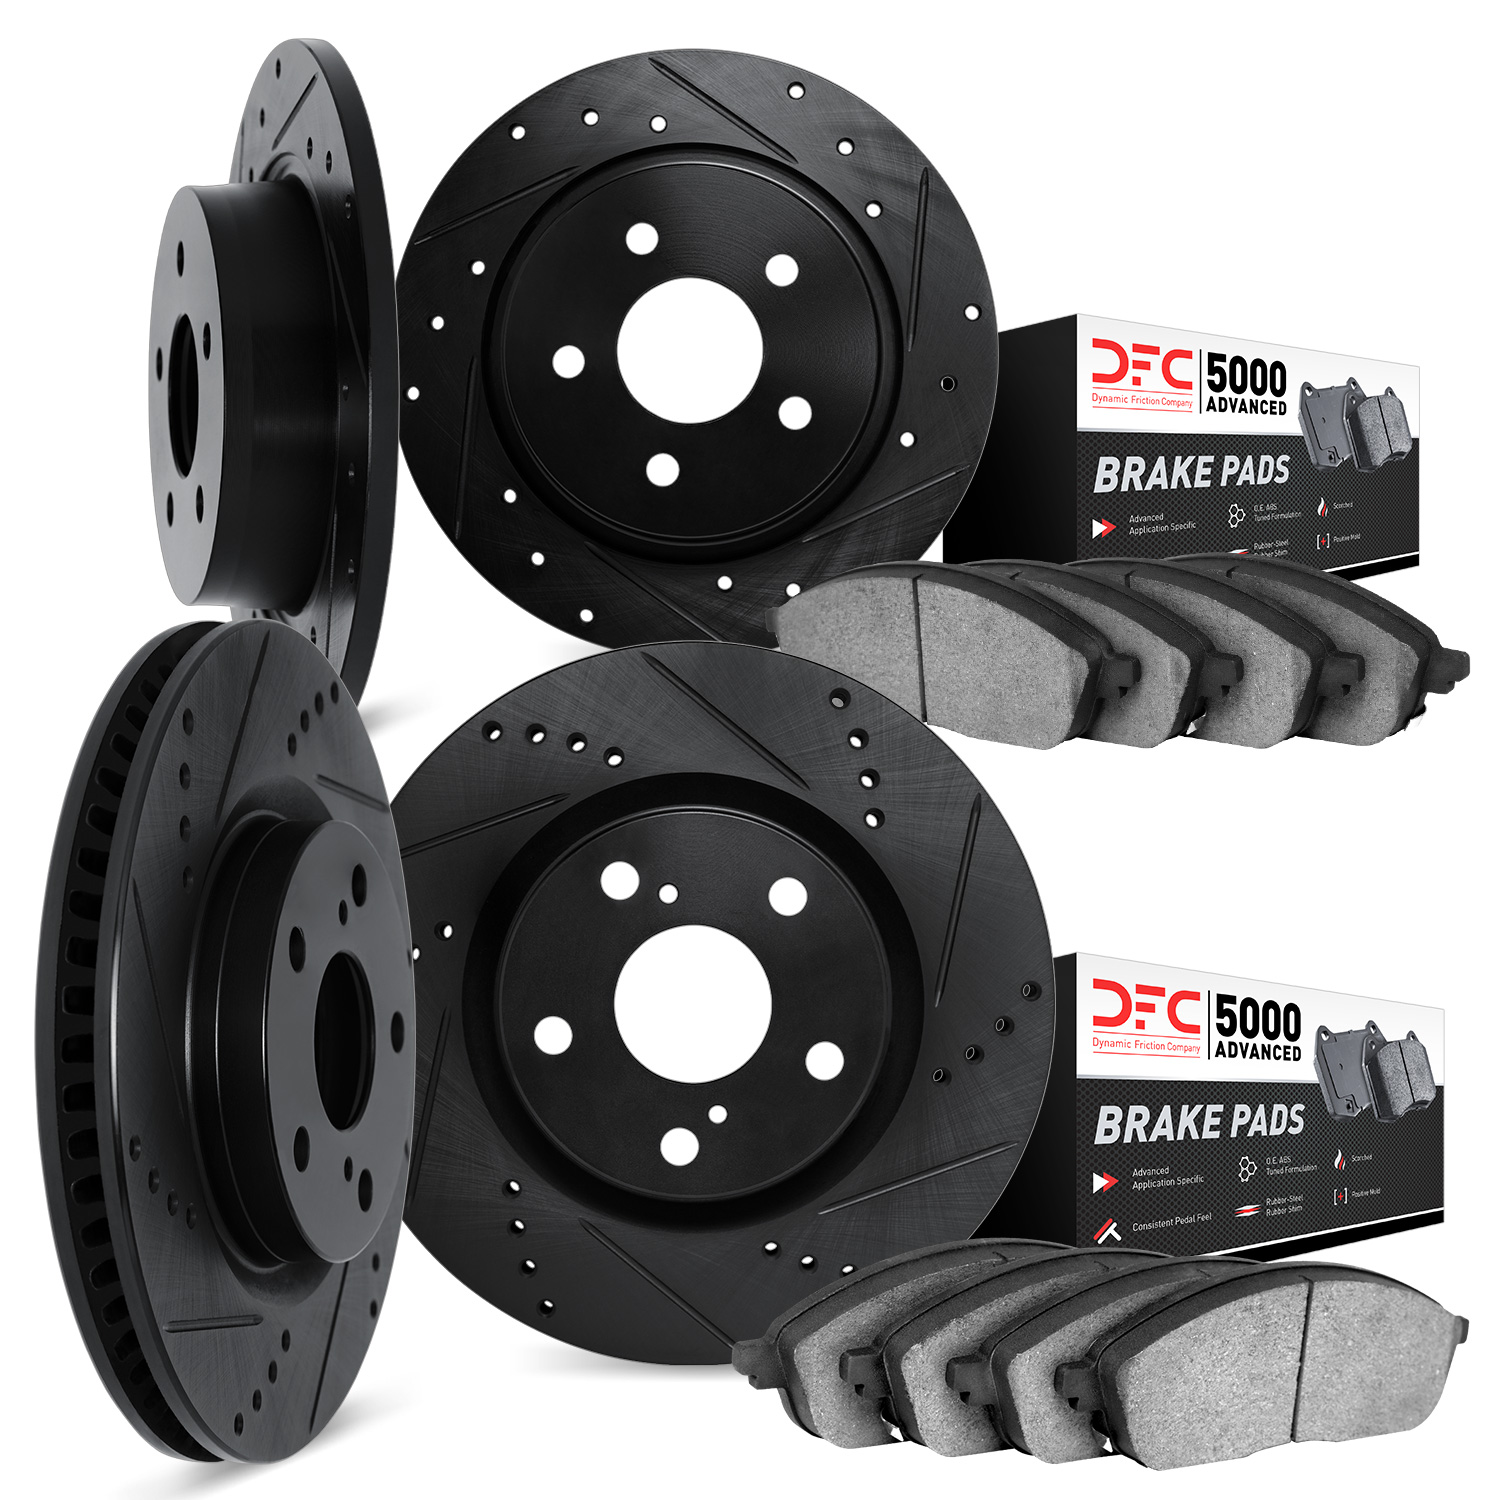 8504-45025 Drilled/Slotted Brake Rotors w/5000 Advanced Brake Pads Kit [Black], 2006-2010 GM, Position: Front and Rear